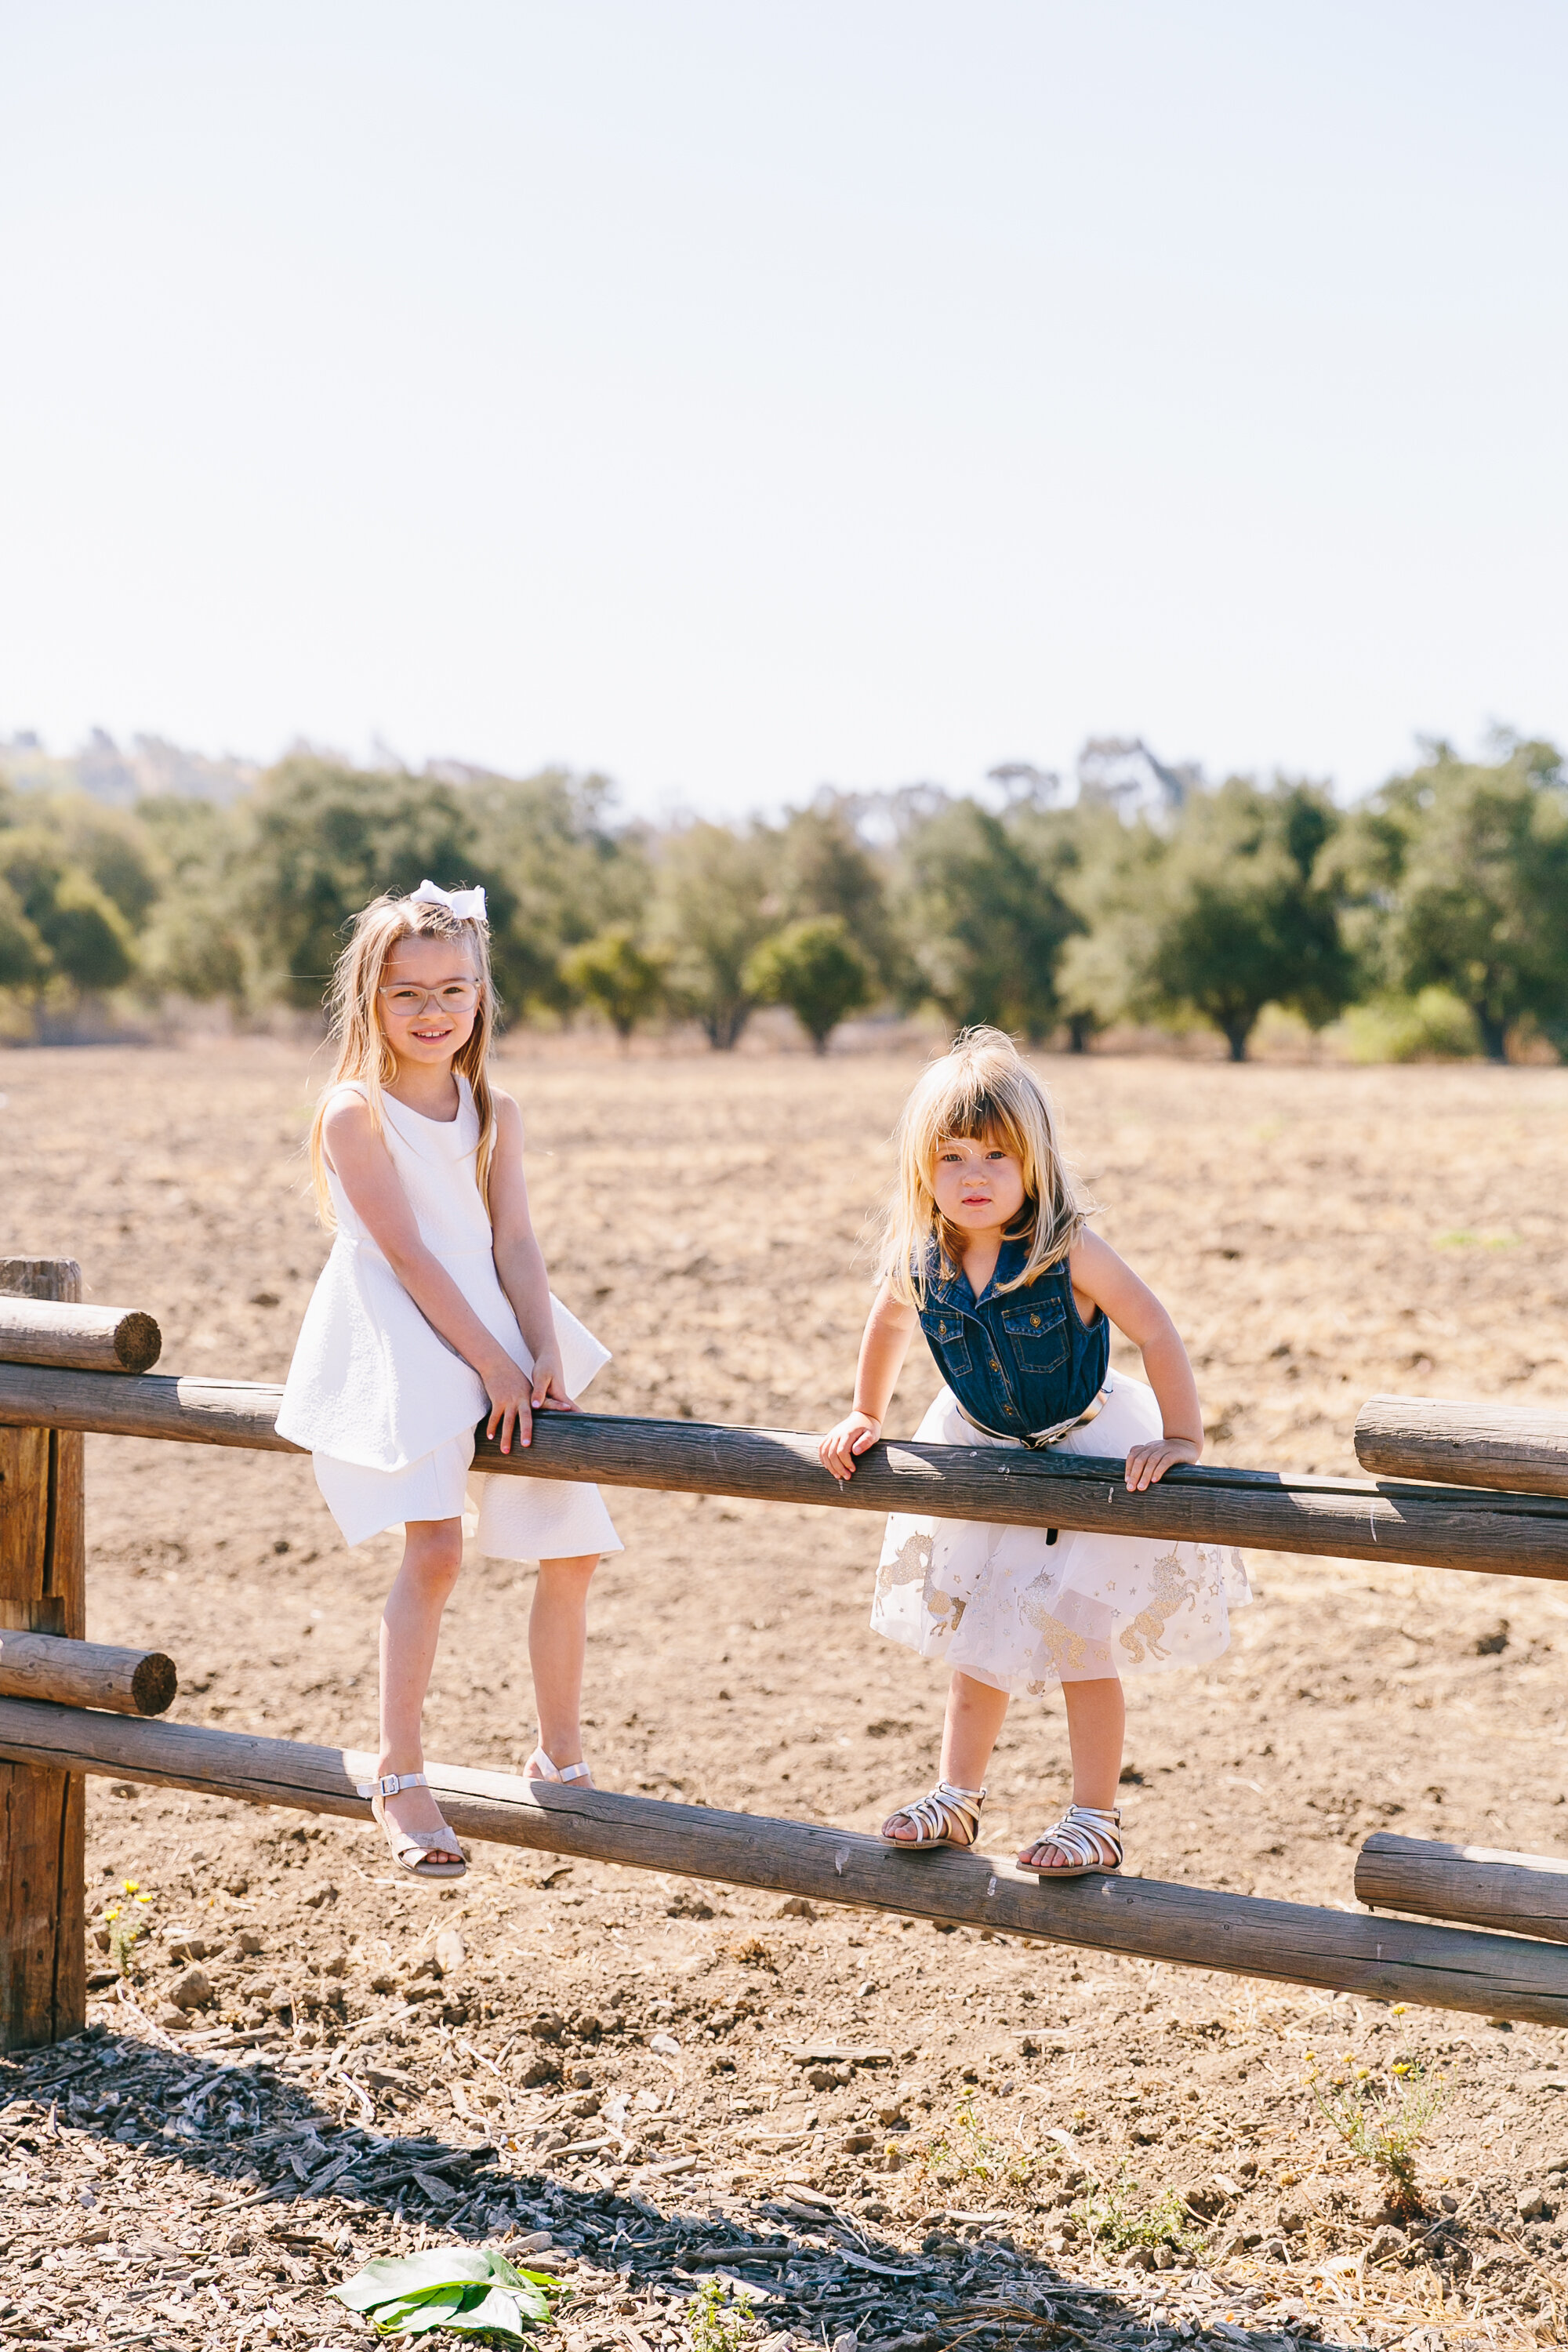 Los_Angeles_Family_Photography_Orange_County_Children_Babies_Field_Farm_Outdoors_Morning_Session_California_Girls_Boys_Kids_Photography-1384.jpg